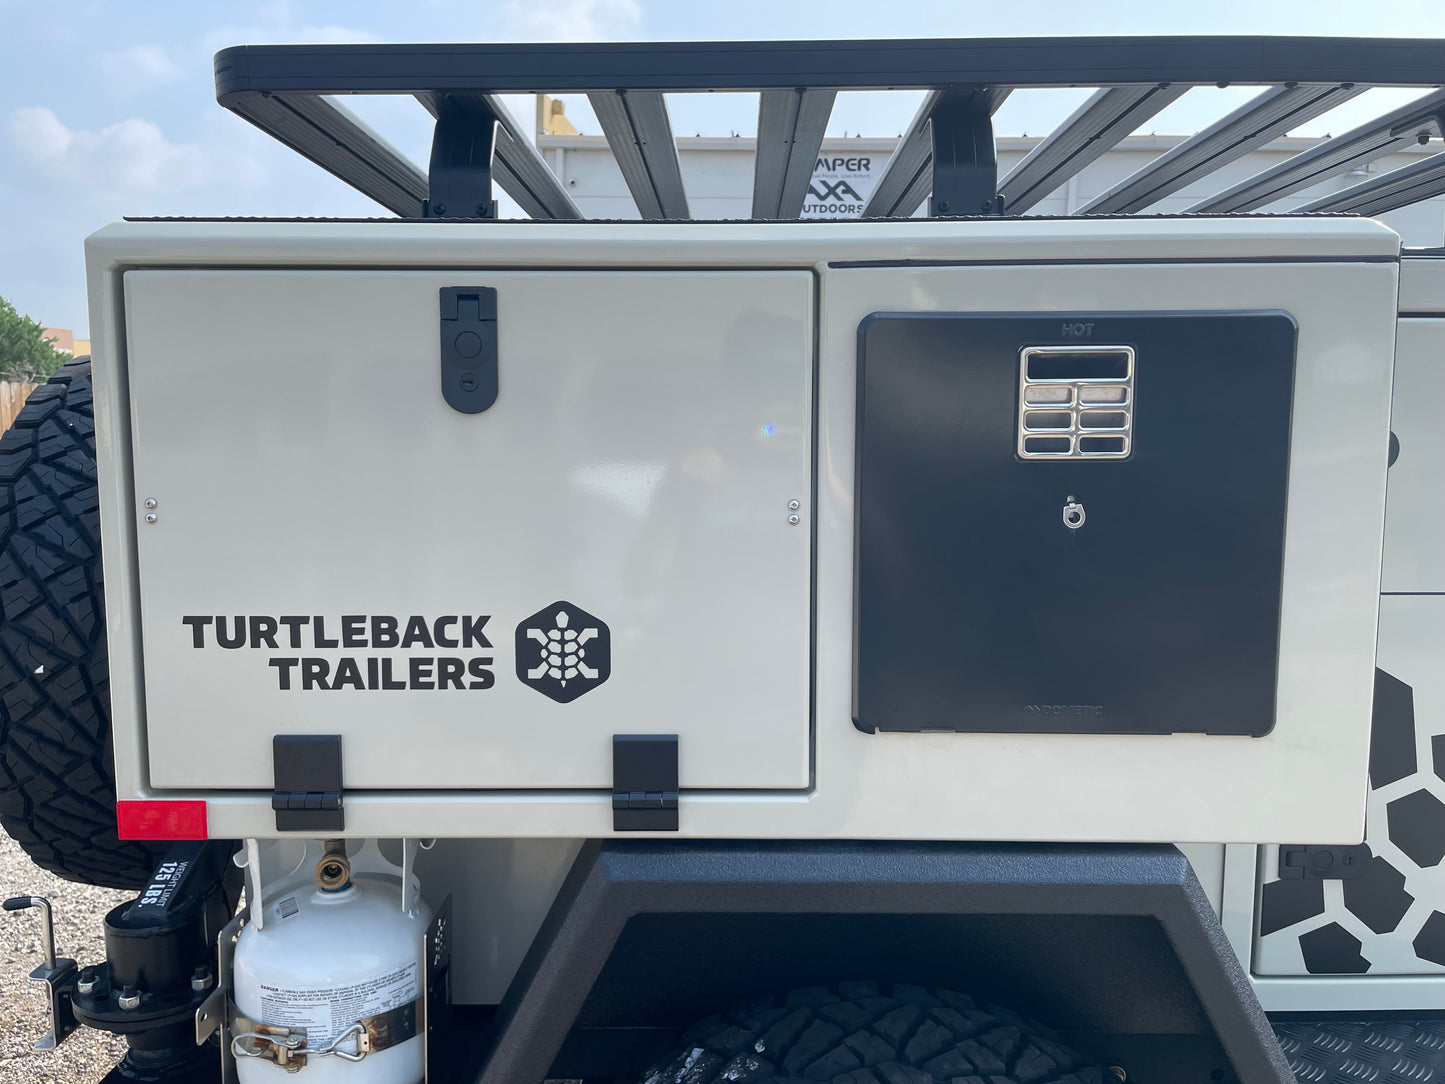 NEW!!! Turtleback Expedition Trailer